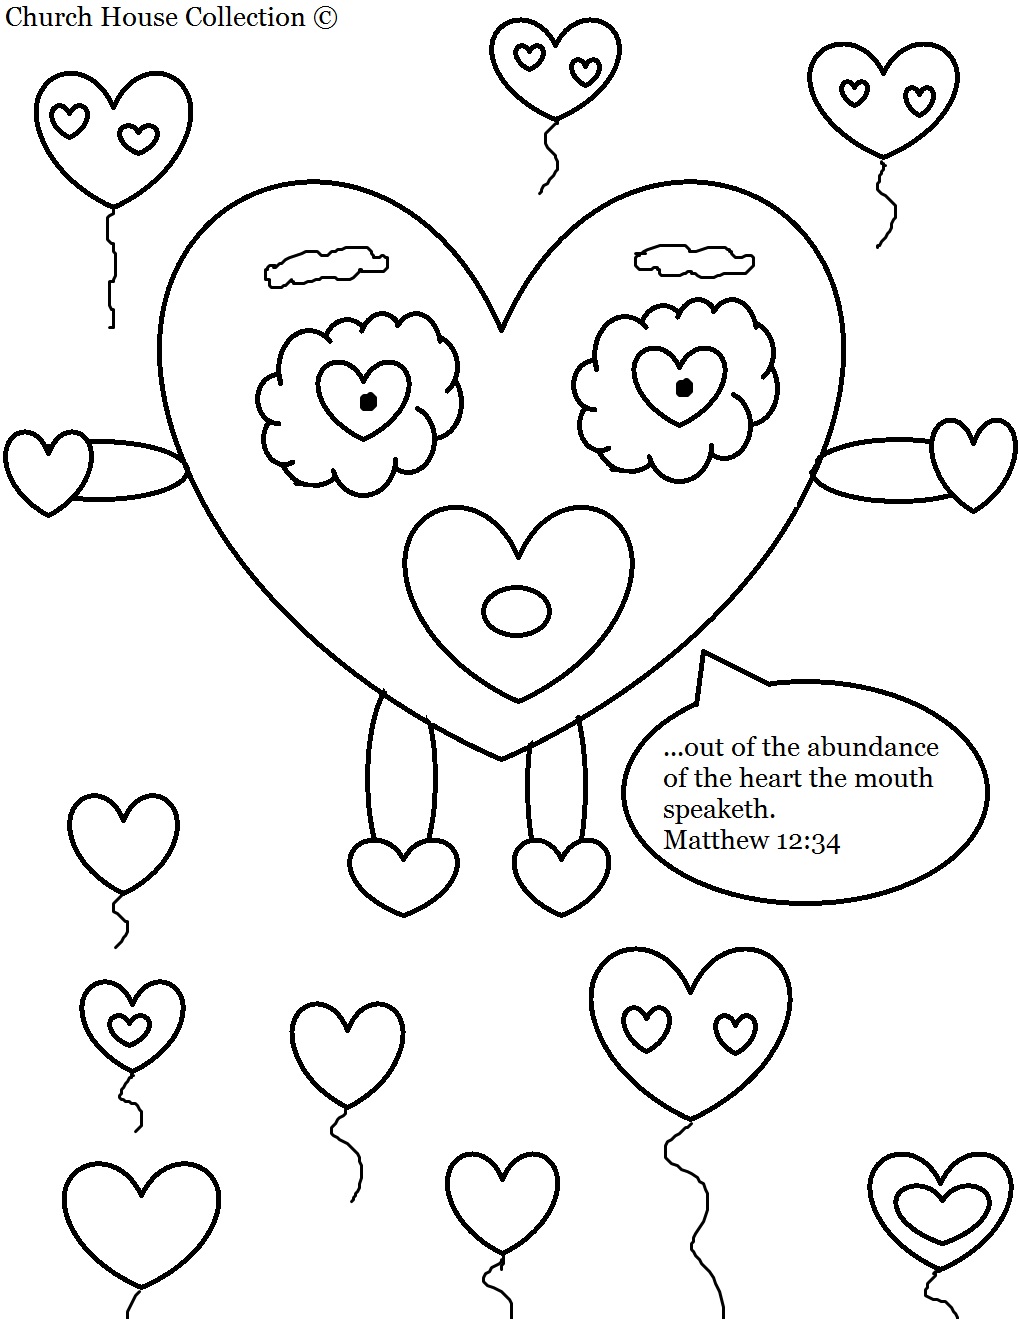 Jesus Christ Coloring Images Sunday School Images for You to Fill with Colour A20